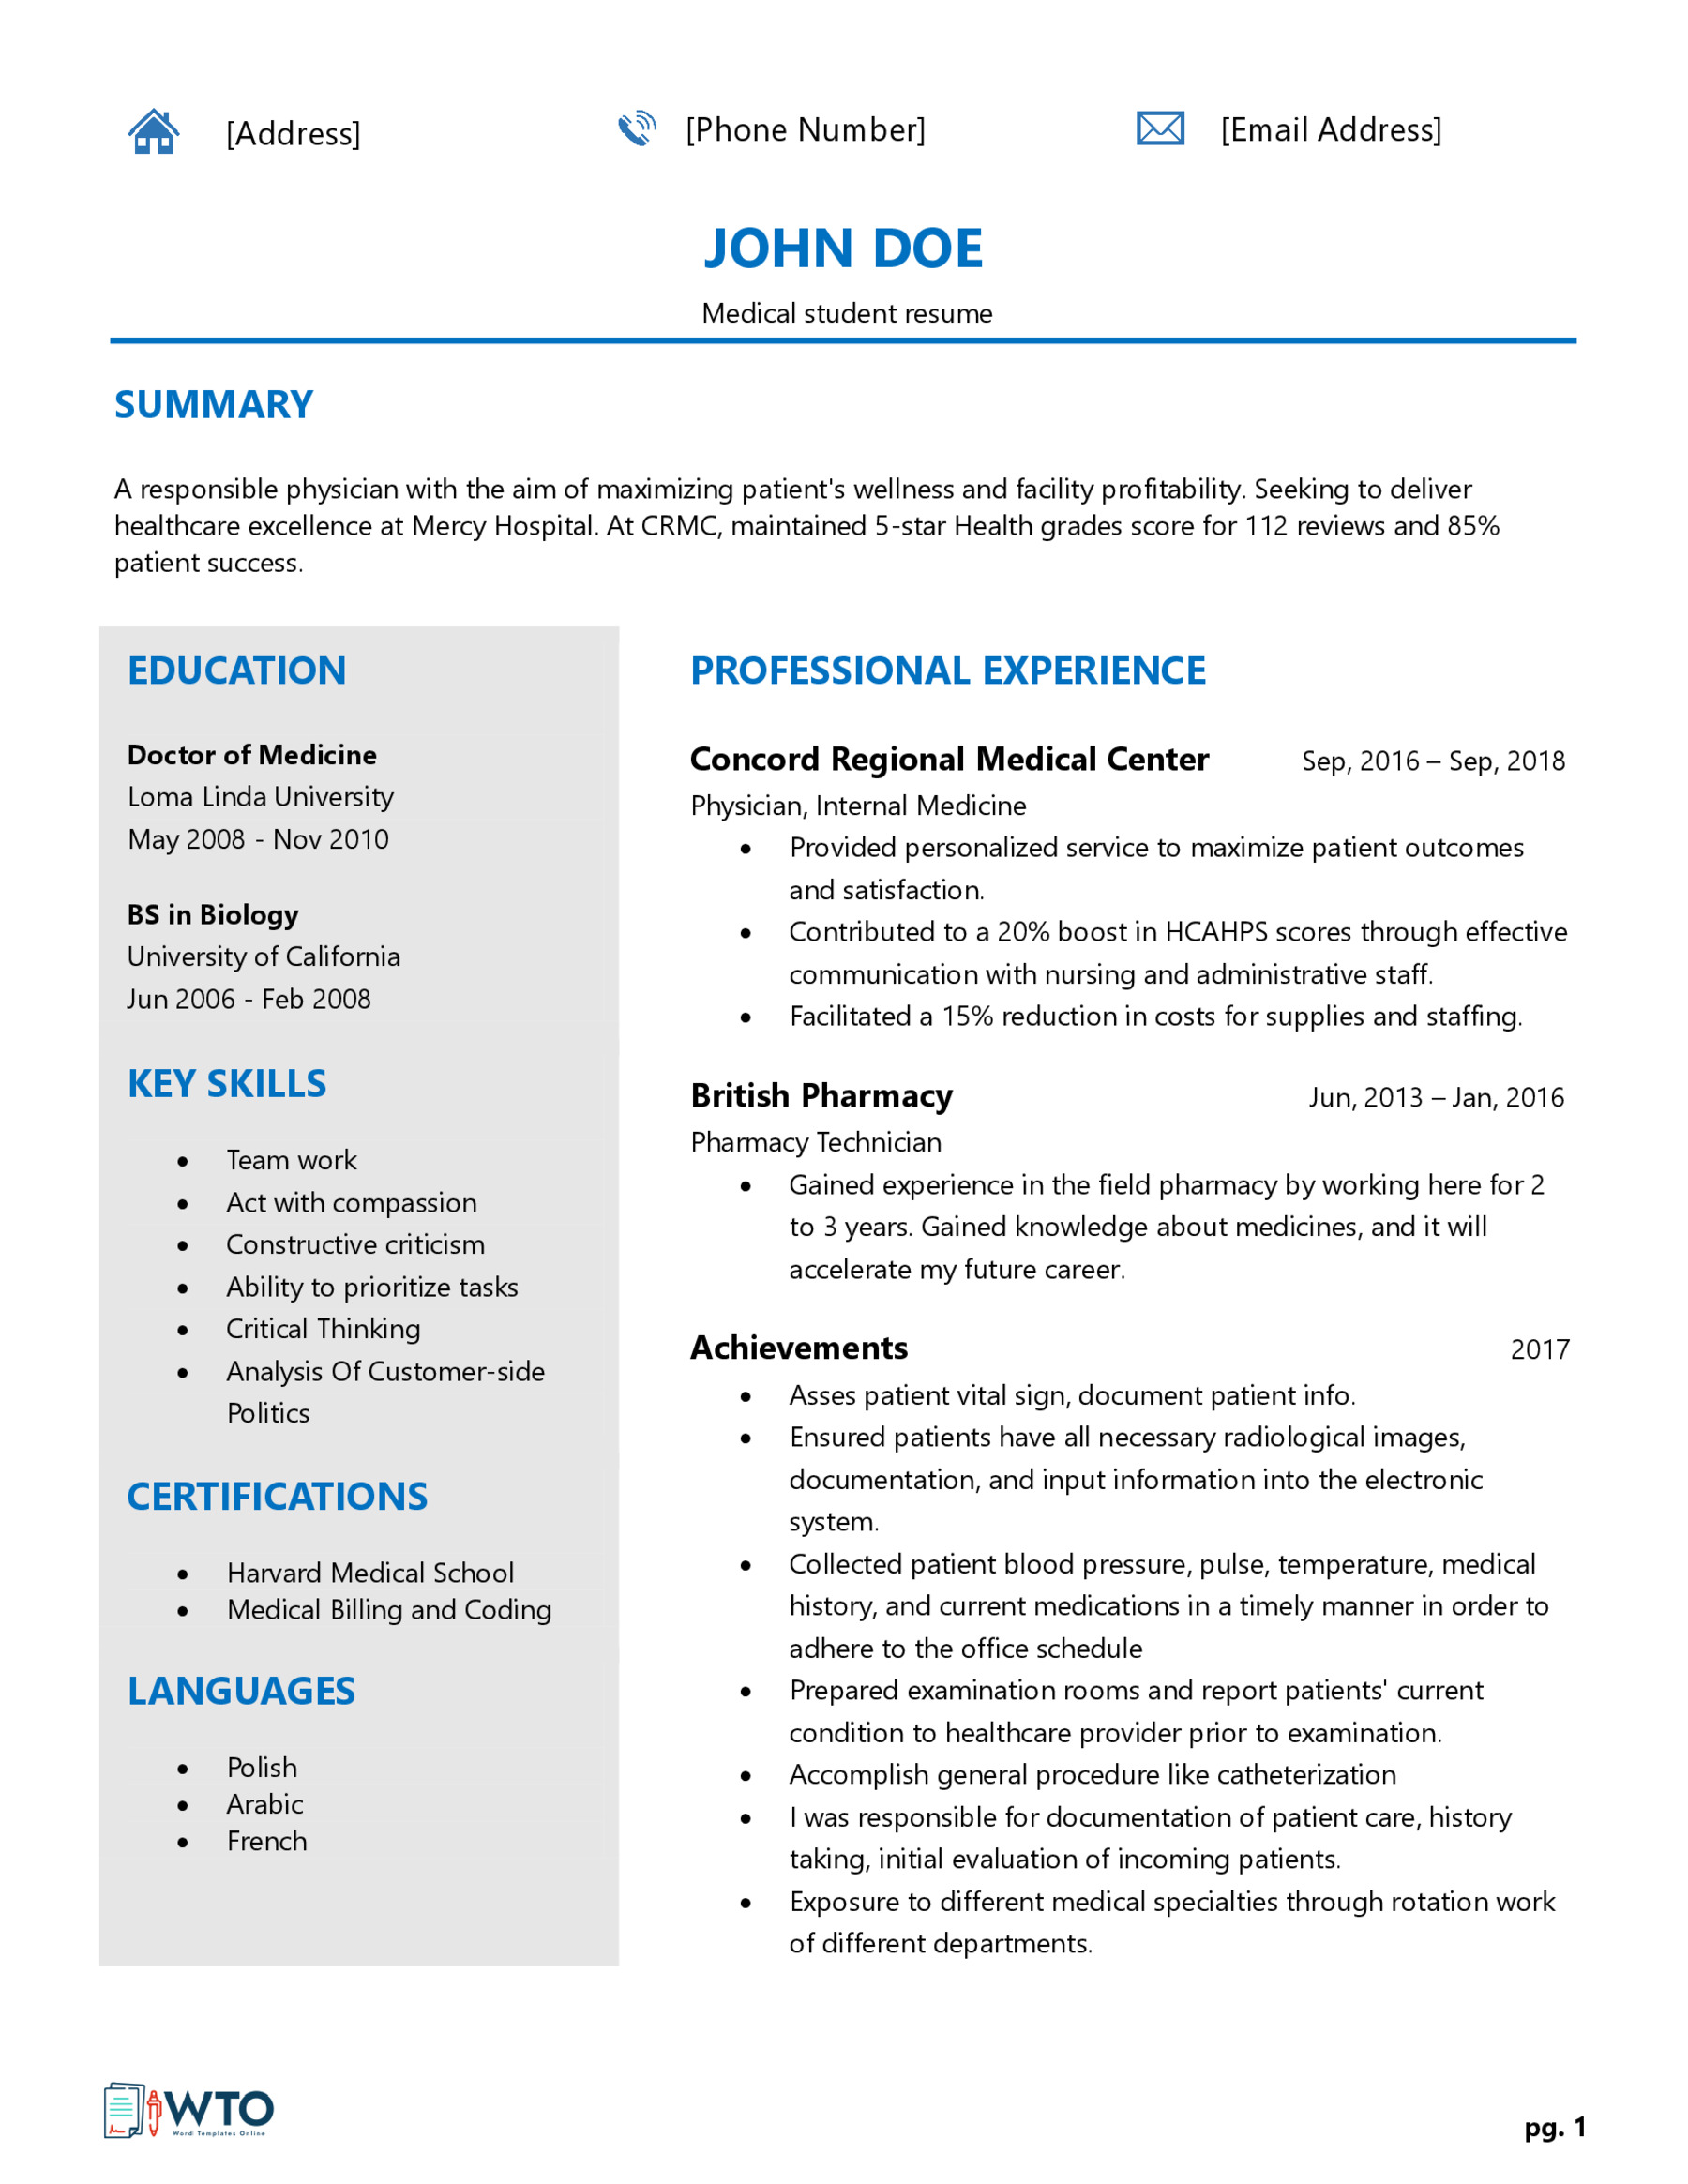 Medical Students Resume Template - Ready-to-Use Word Document